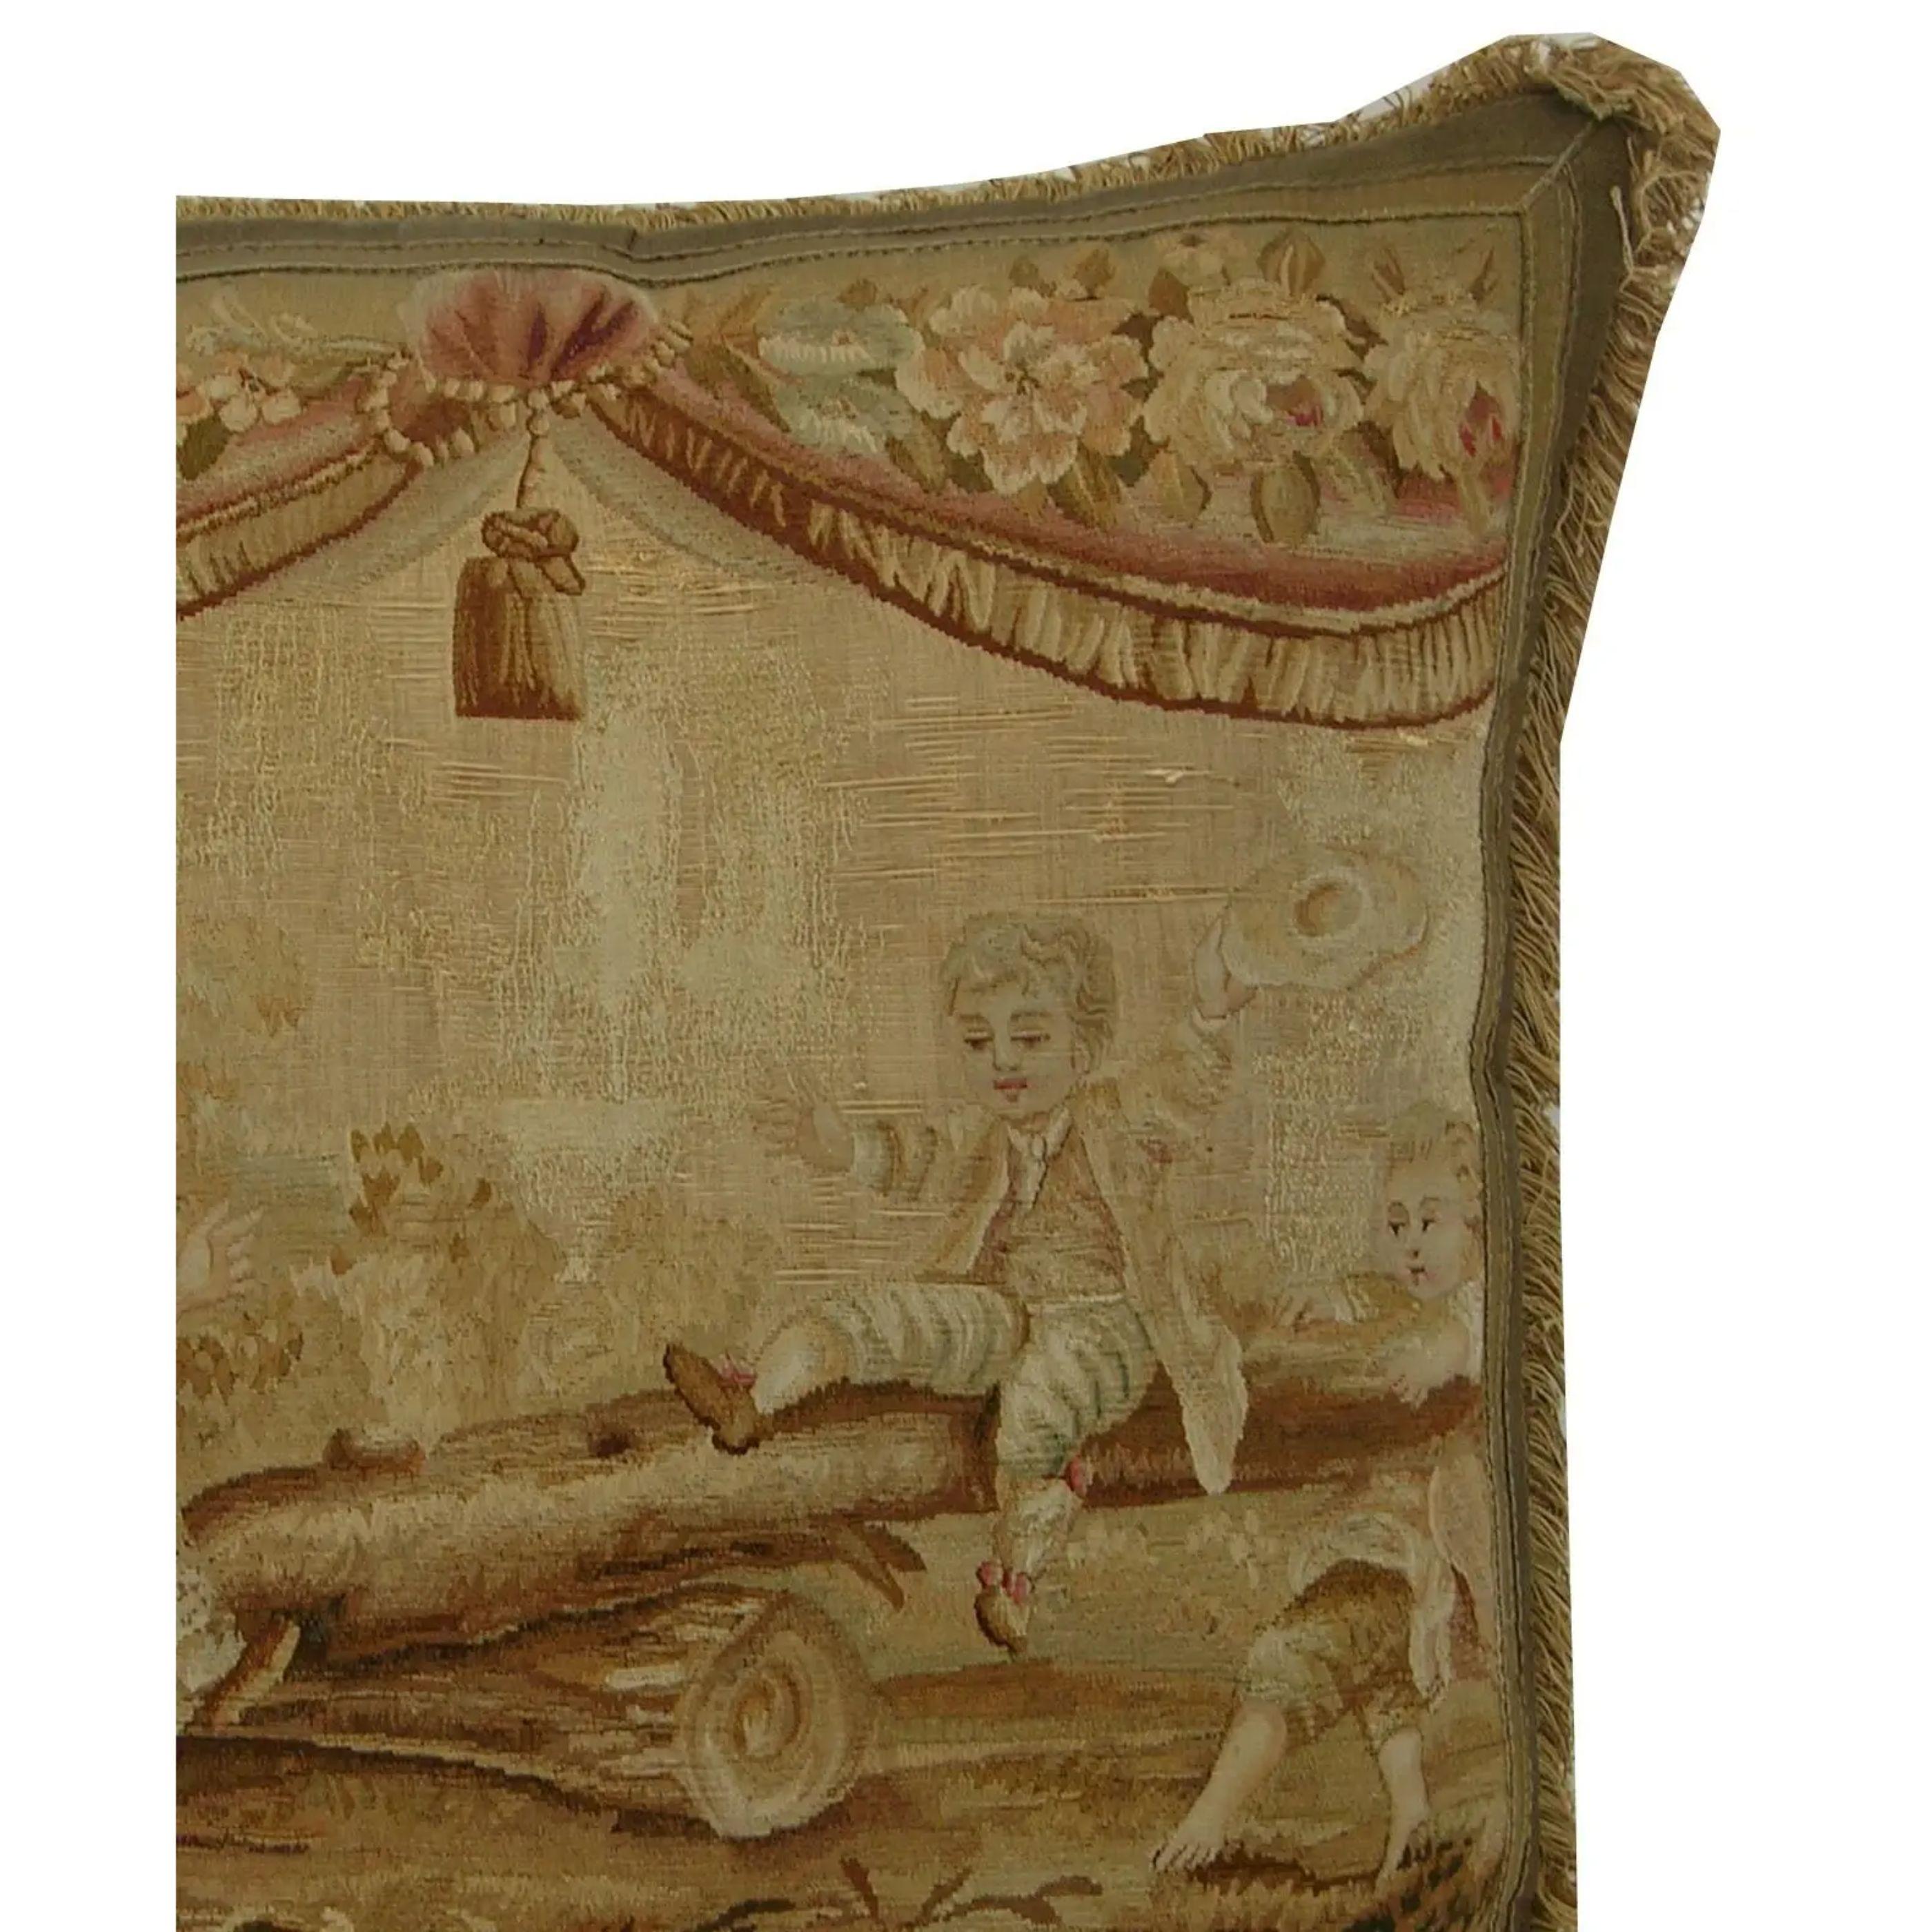 Antique 18th century French tapestry pillow. 24'' x 22'' x 6''.